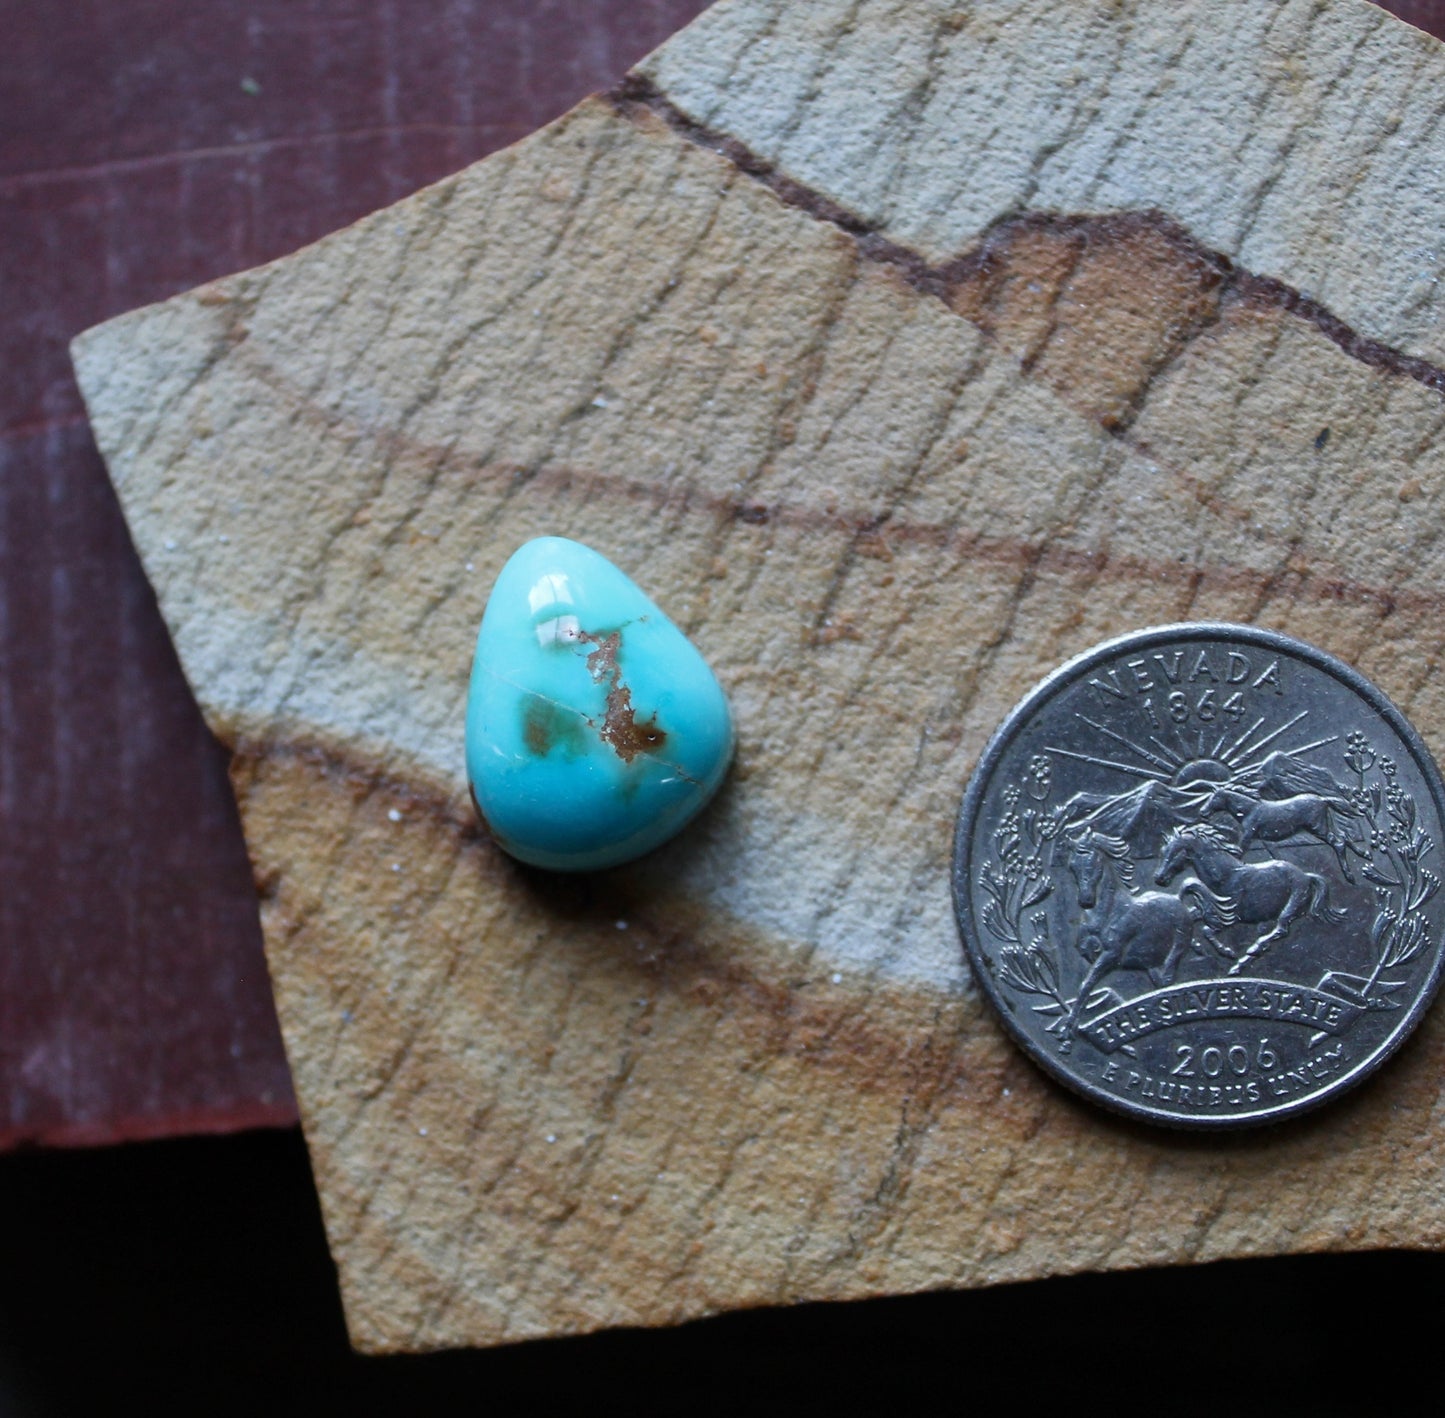 11 carat deep blue Stone Mountain Turquoise cabochon with a high dome